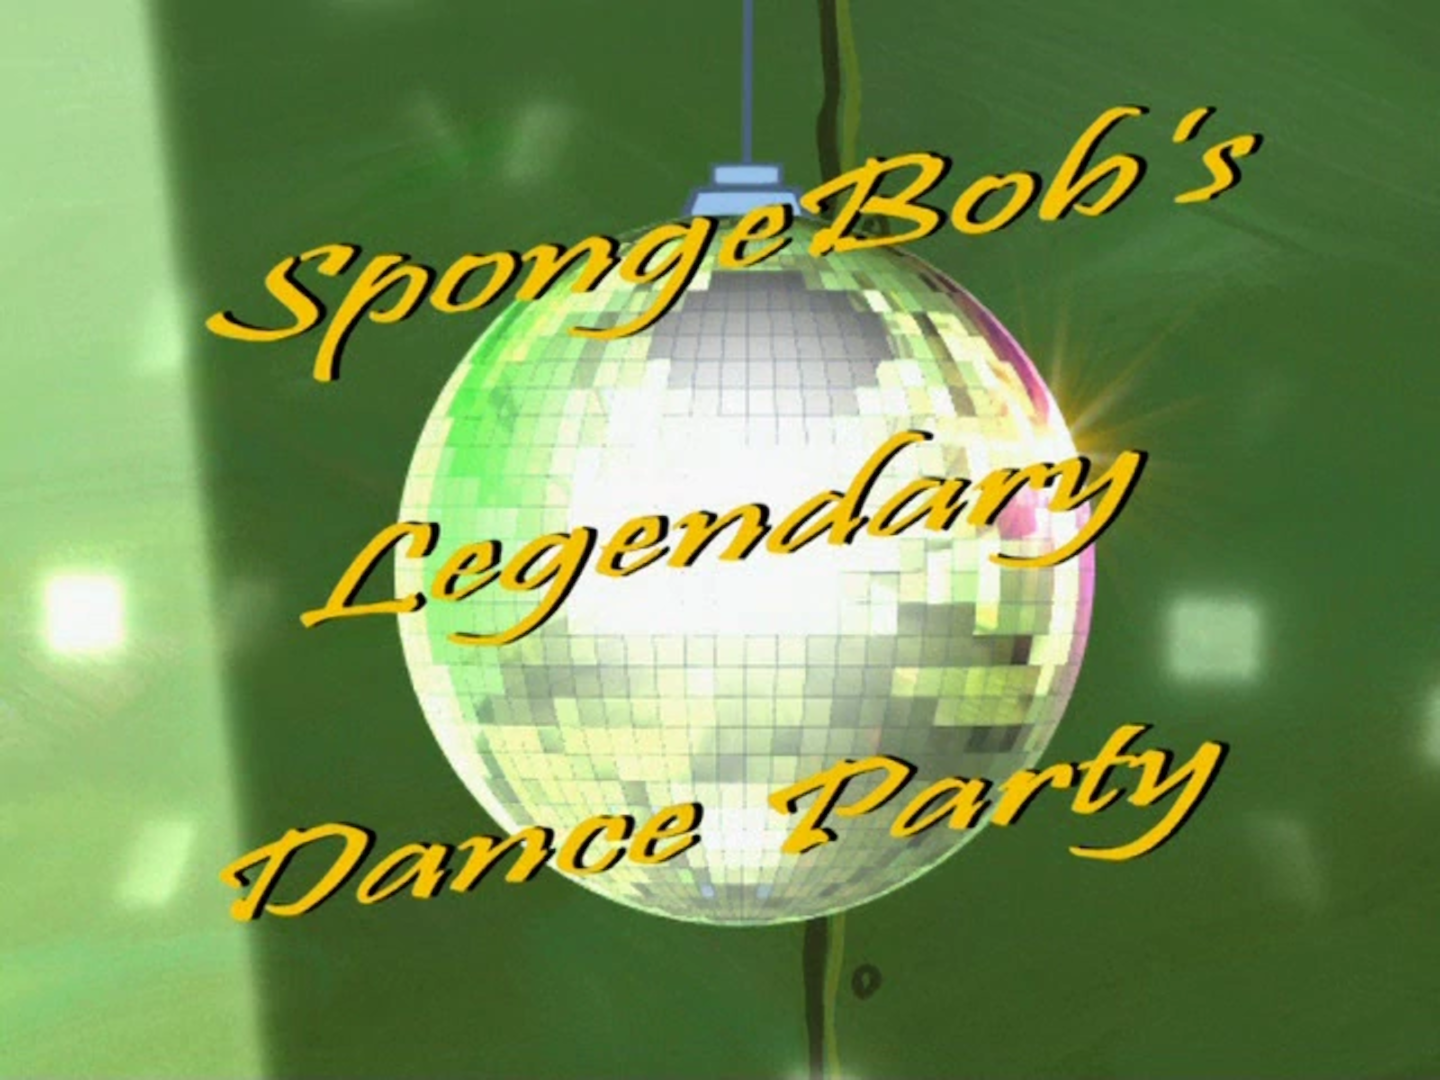 Download this Spongebob Legendary Dance Party Titlecard picture